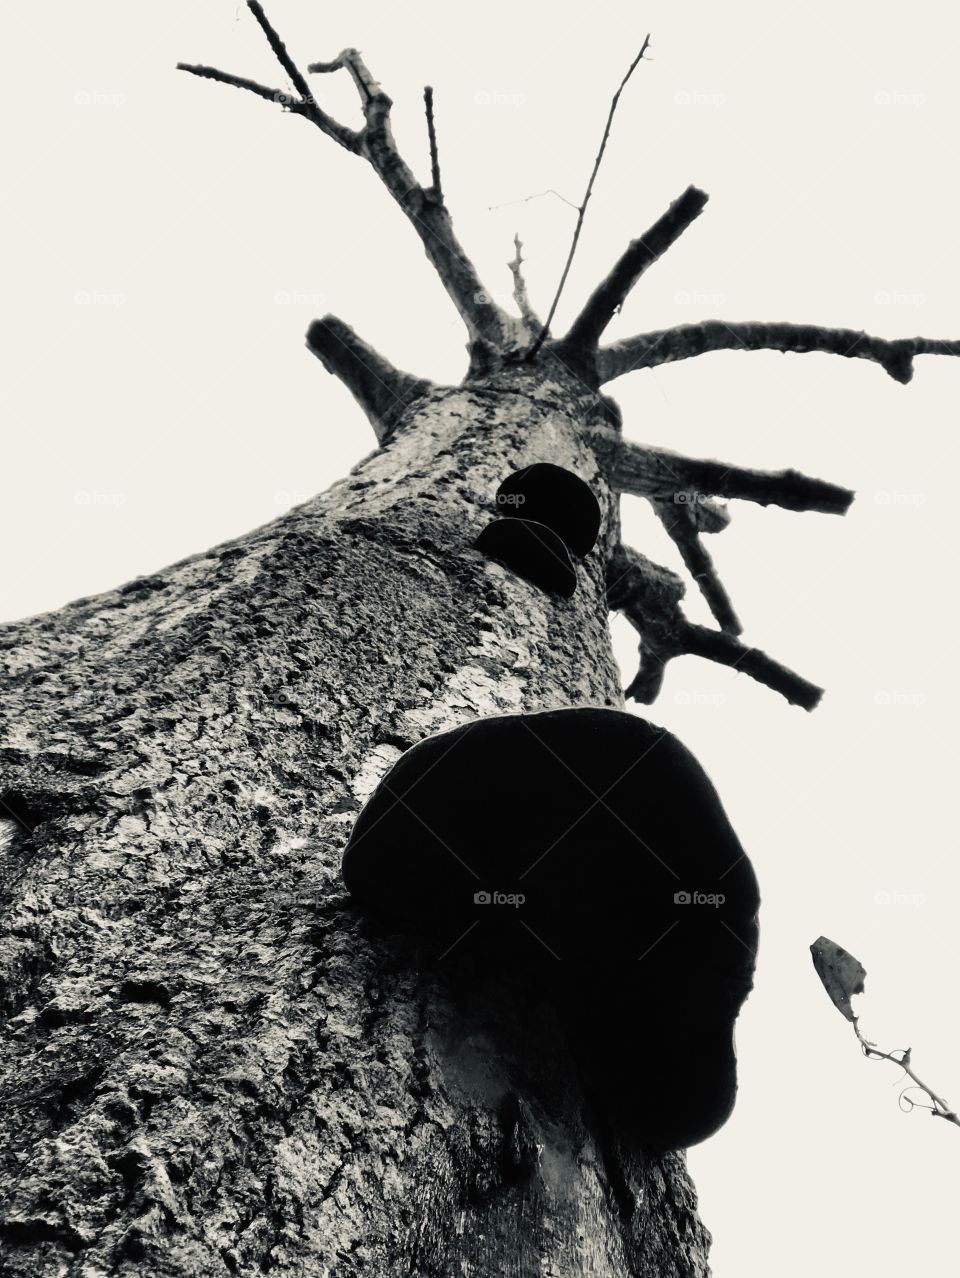 Looking up at an old deceased tree found in the woods of South Georgia. 